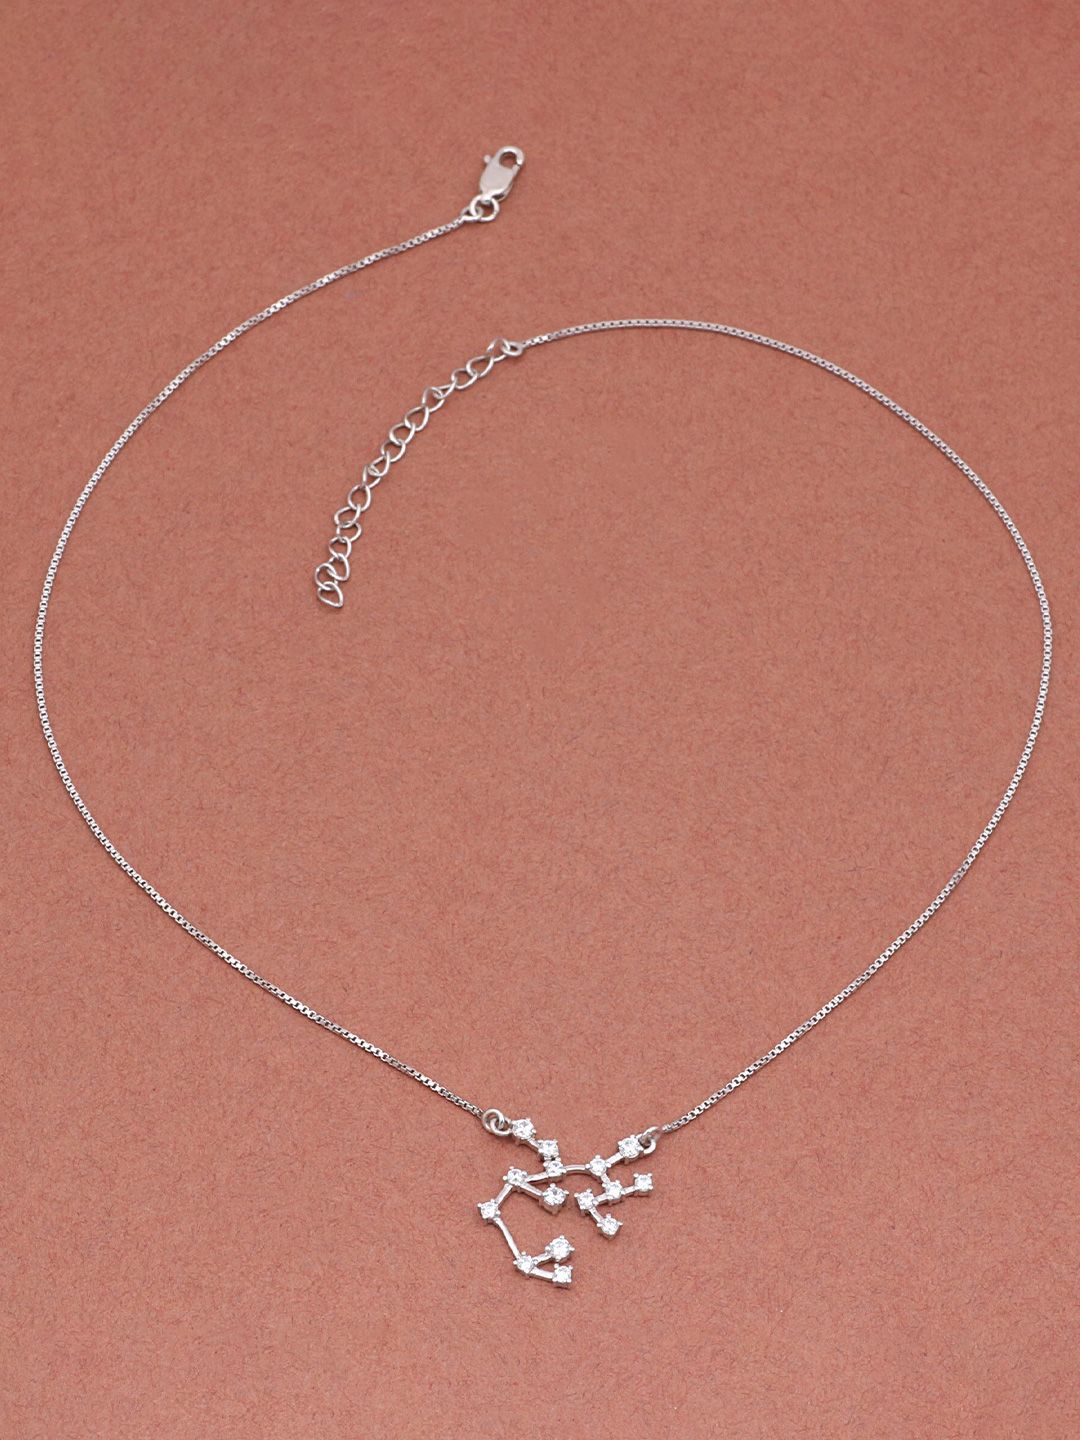 Silgo Silver-Toned Sterling Silver Rhodium-Plated Sagittarius Constellation Sign Necklace Price in India